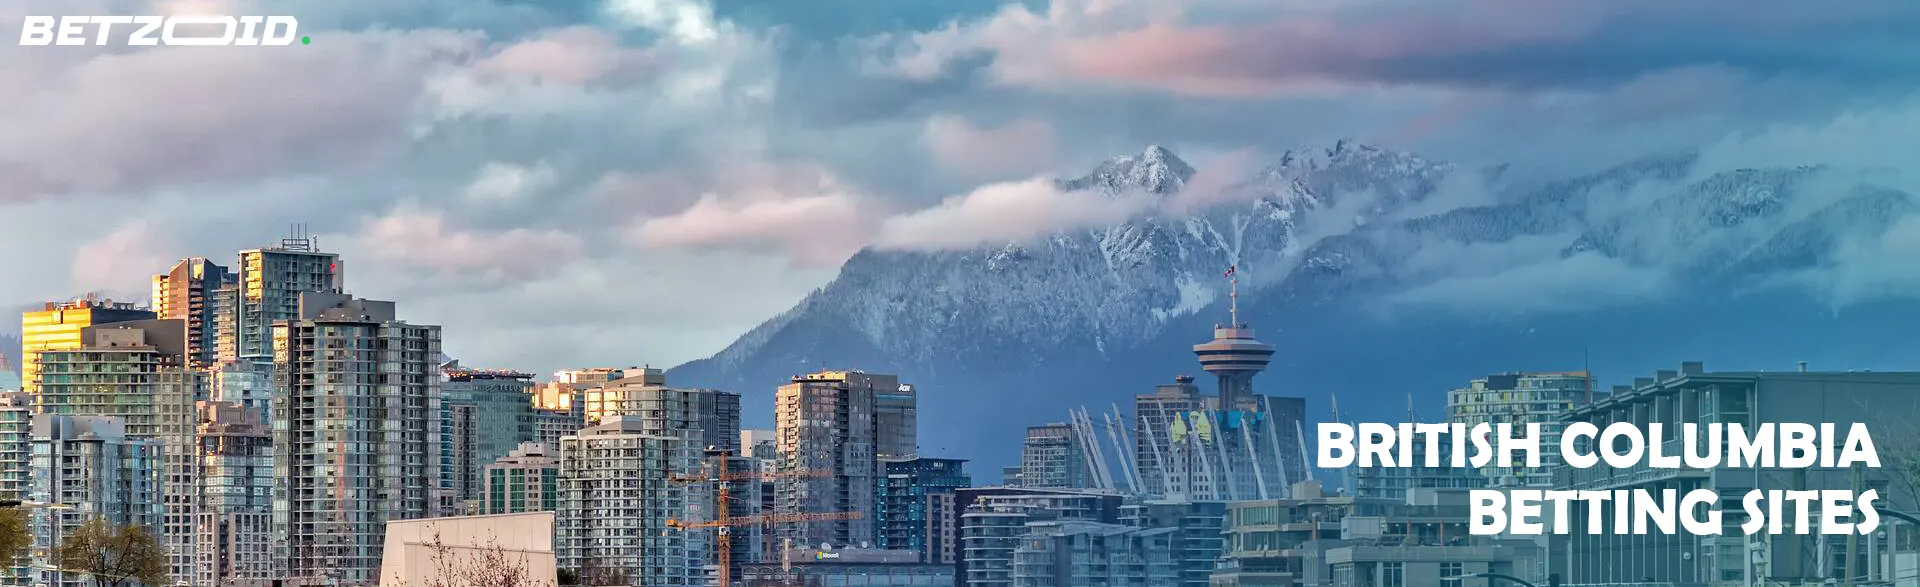 Skyline of Vancouver, British Columbia with mountains in the background, highlighting the modern and scenic environment of British Columbia betting sites.